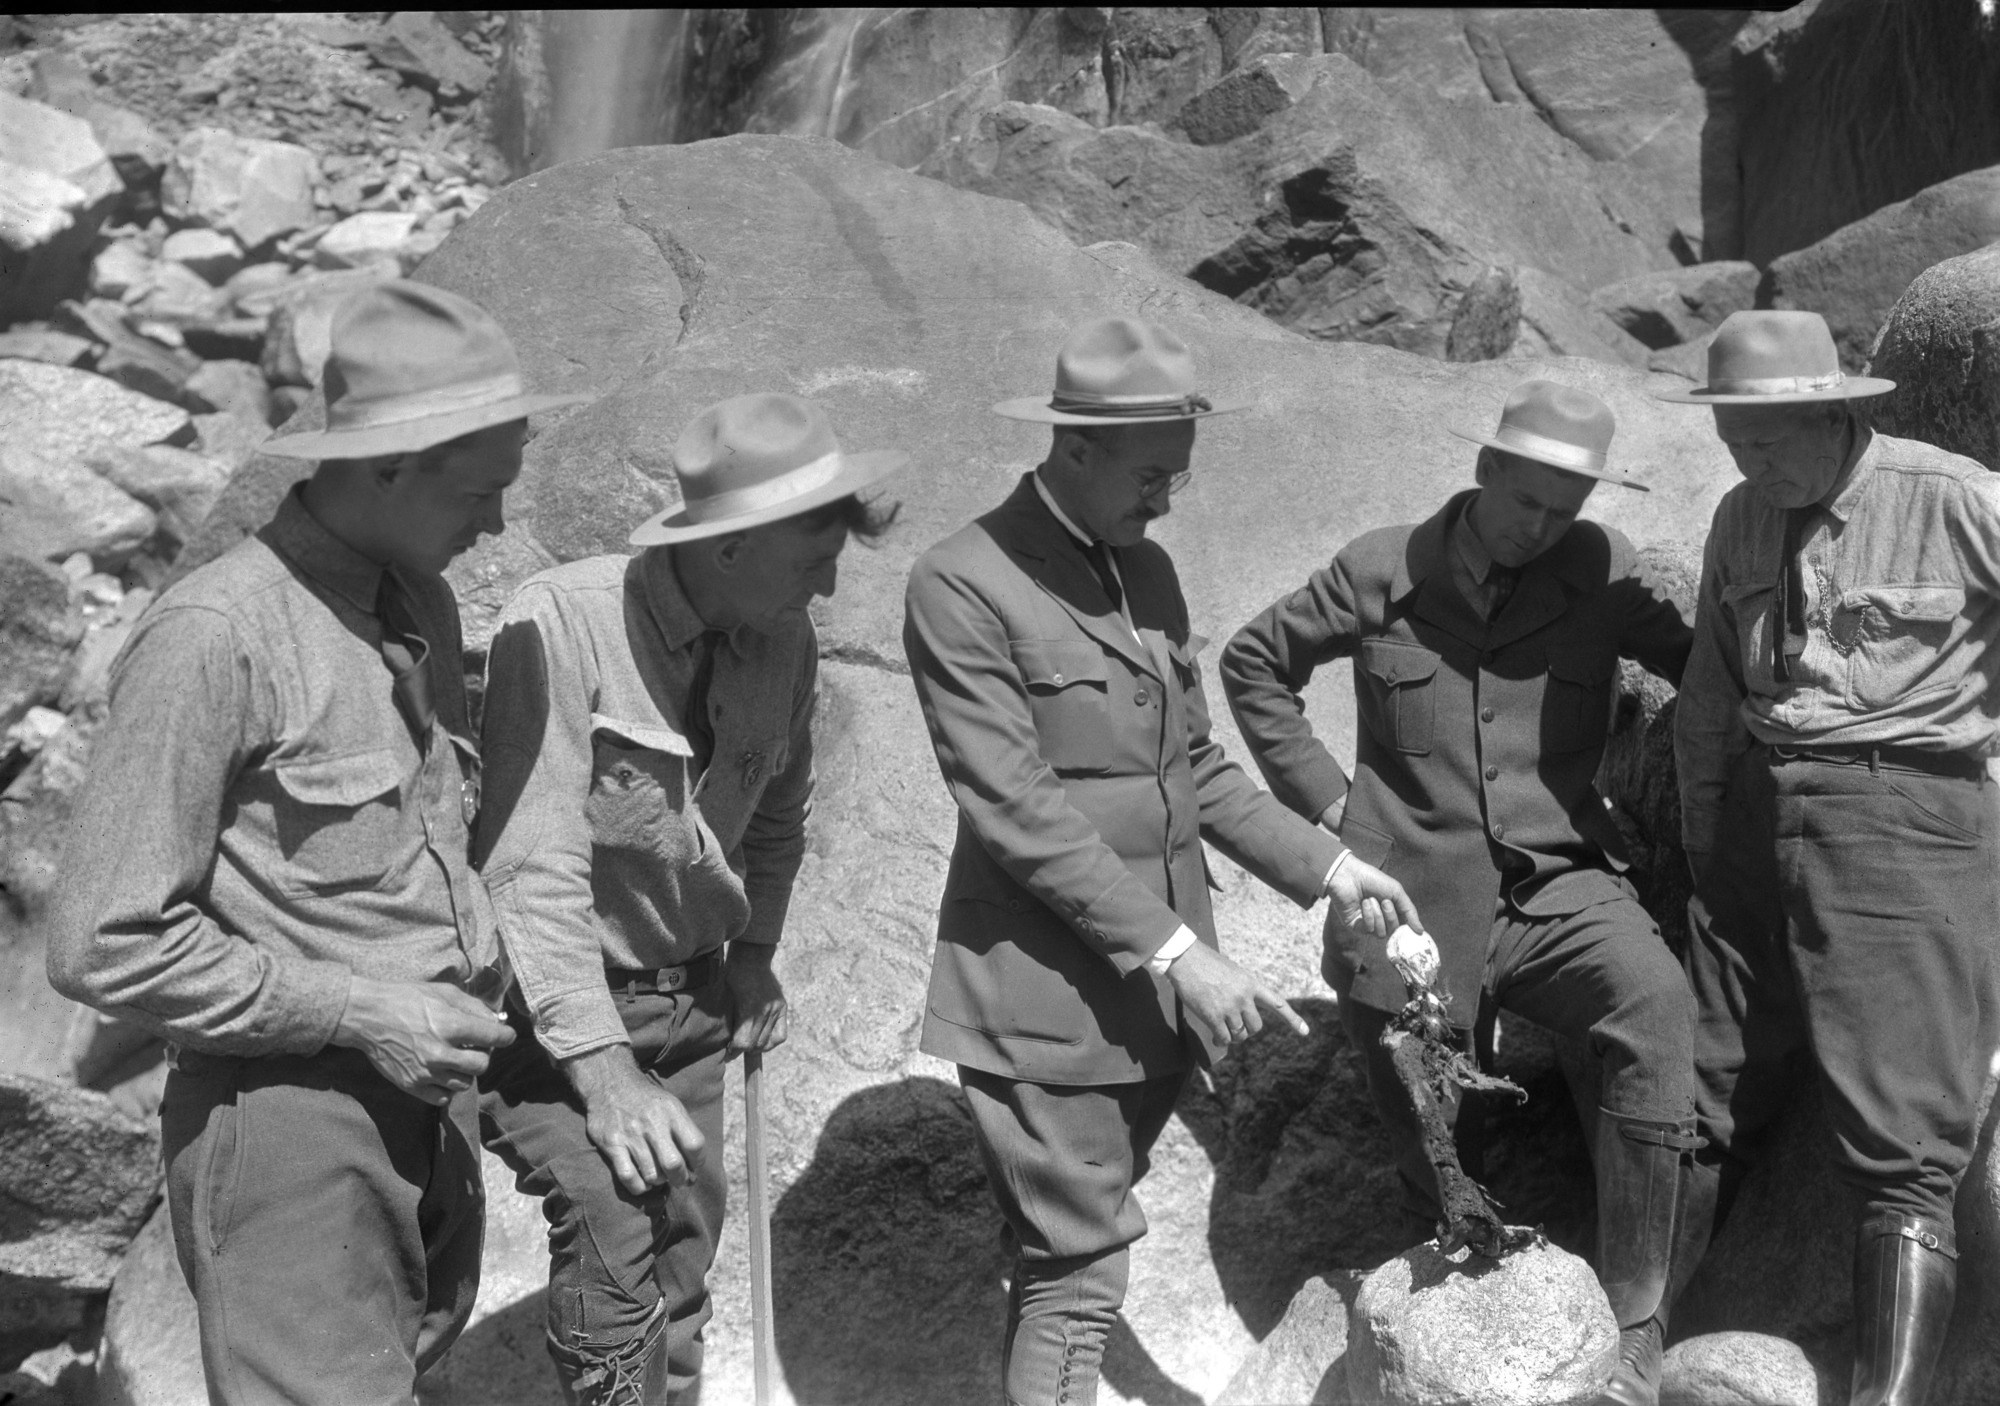 Examining the remains of man that jumped over Yosemite Falls. L-R: Holbrook, Wegner, Church, Boothe & Skelton